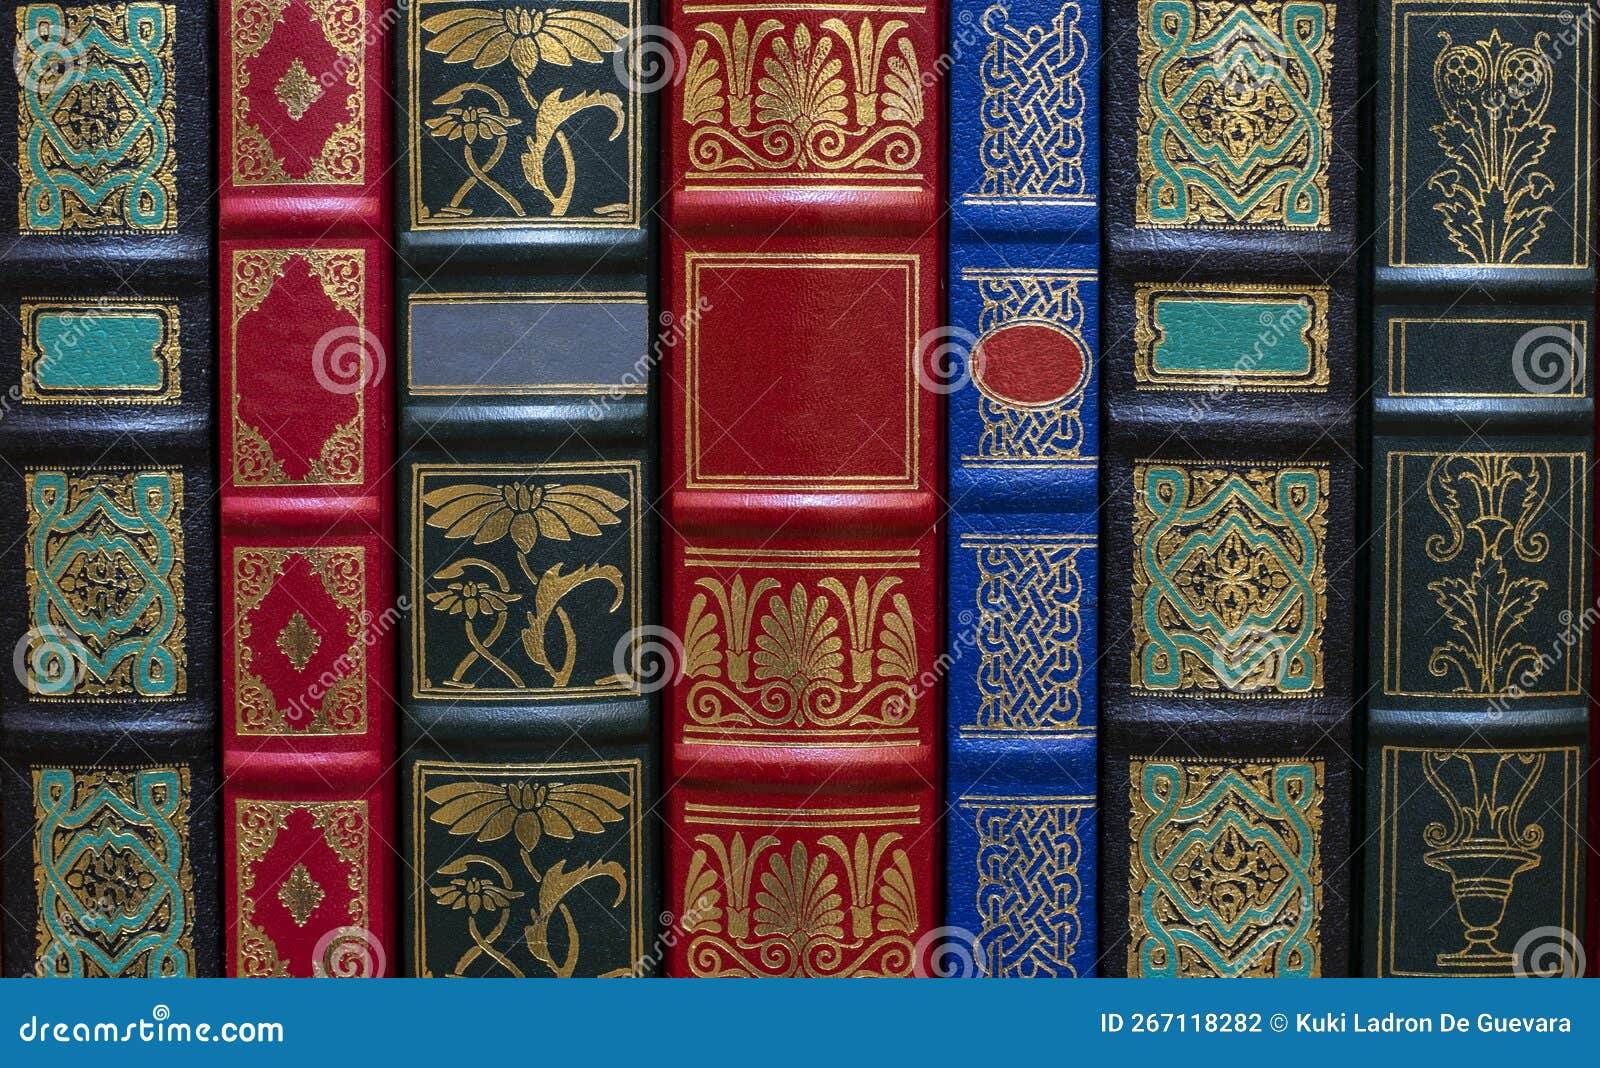 detail of some classic books on a shelf